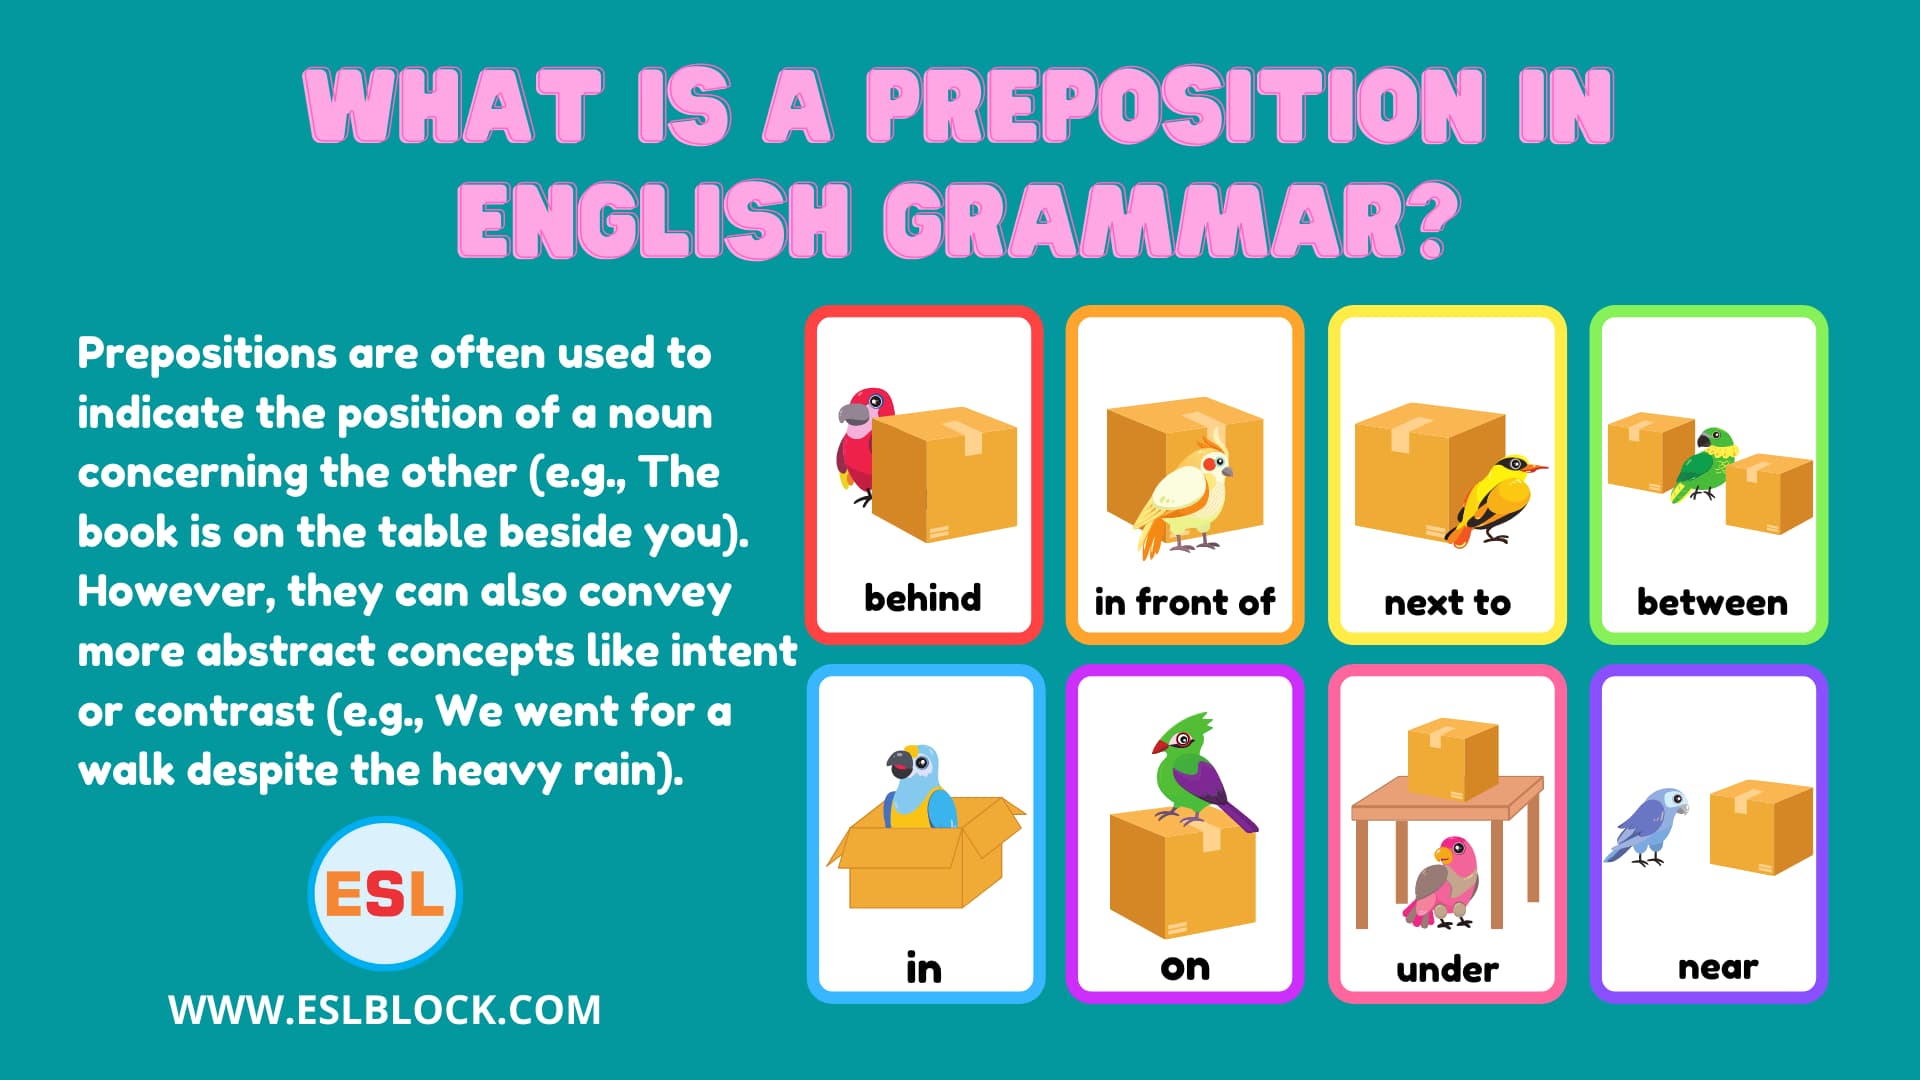 Common Errors with Prepositions, English Grammar, How to Use Prepositions, Parts of Speech, Parts of Speech in English Grammar, Preposition Definition, Preposition Examples, Preposition Rules, Prepositions of Movement, Prepositions of Place, Prepositions of Time and Place, Prepositions Used in Sentences, The Importance of Prepositions, Types of Prepositions, What is a Preposition